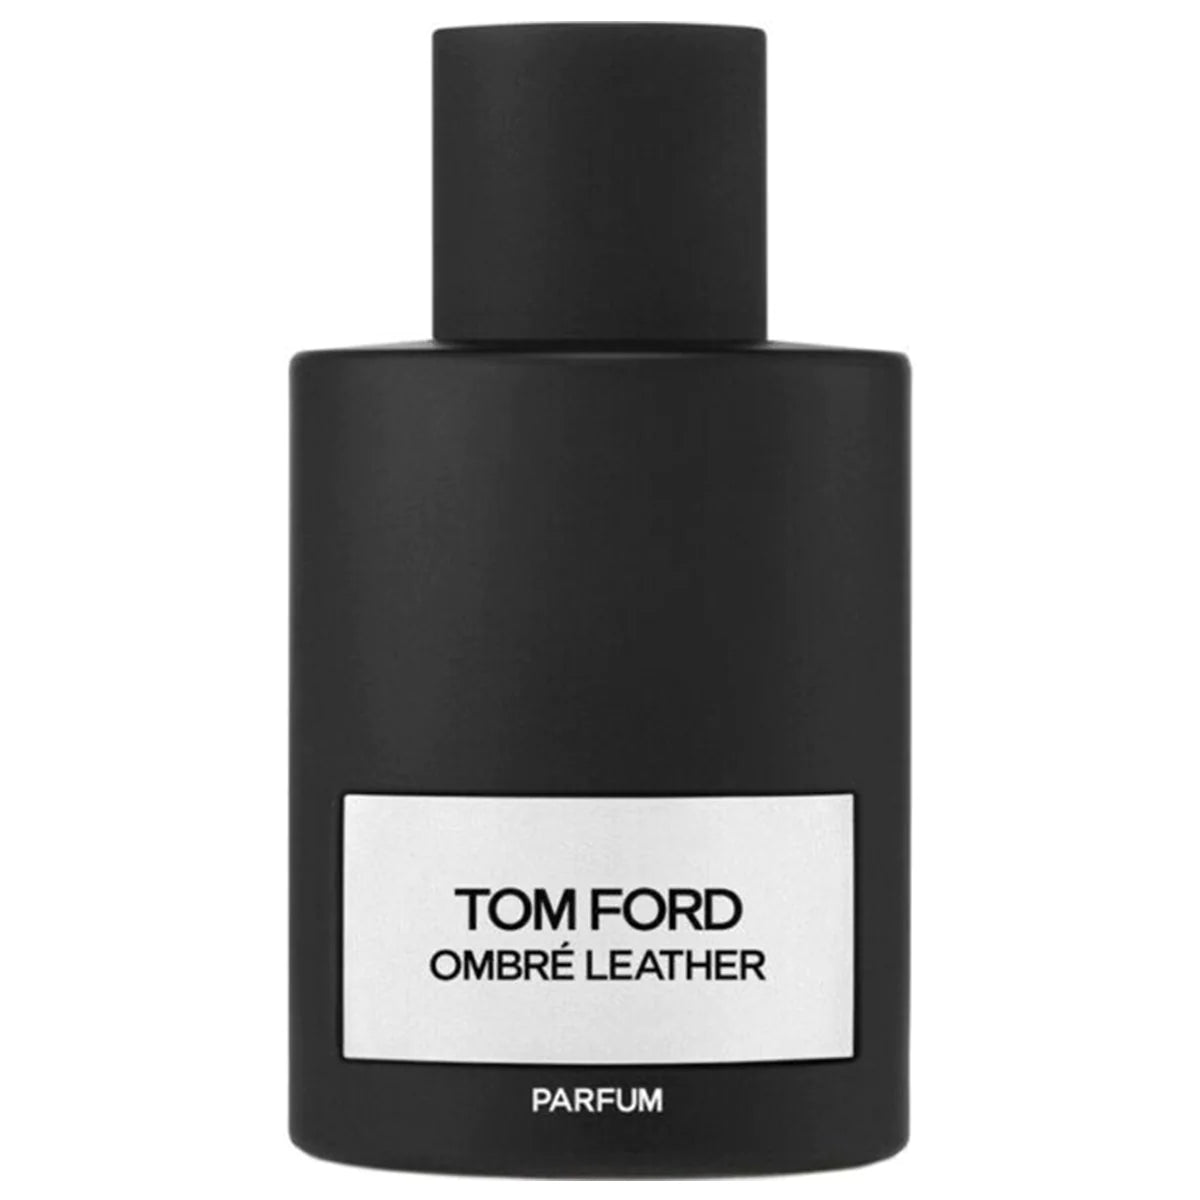 TOMFORD OMBRE LEATHER PARFUM 100ML